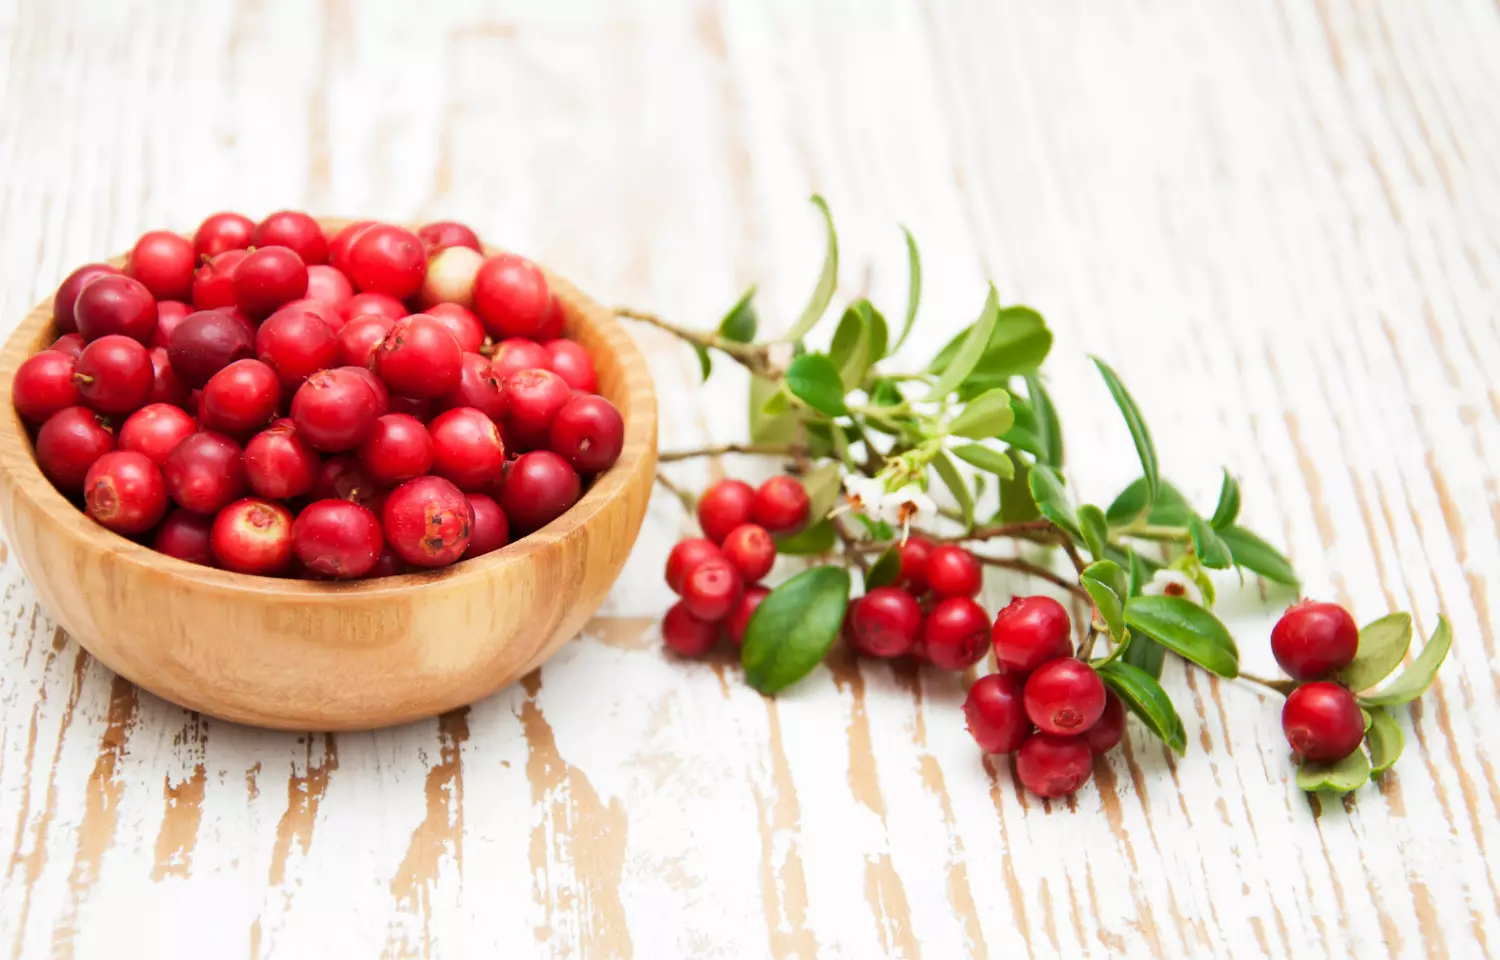 Cranberries consumption could improve memory and brain function